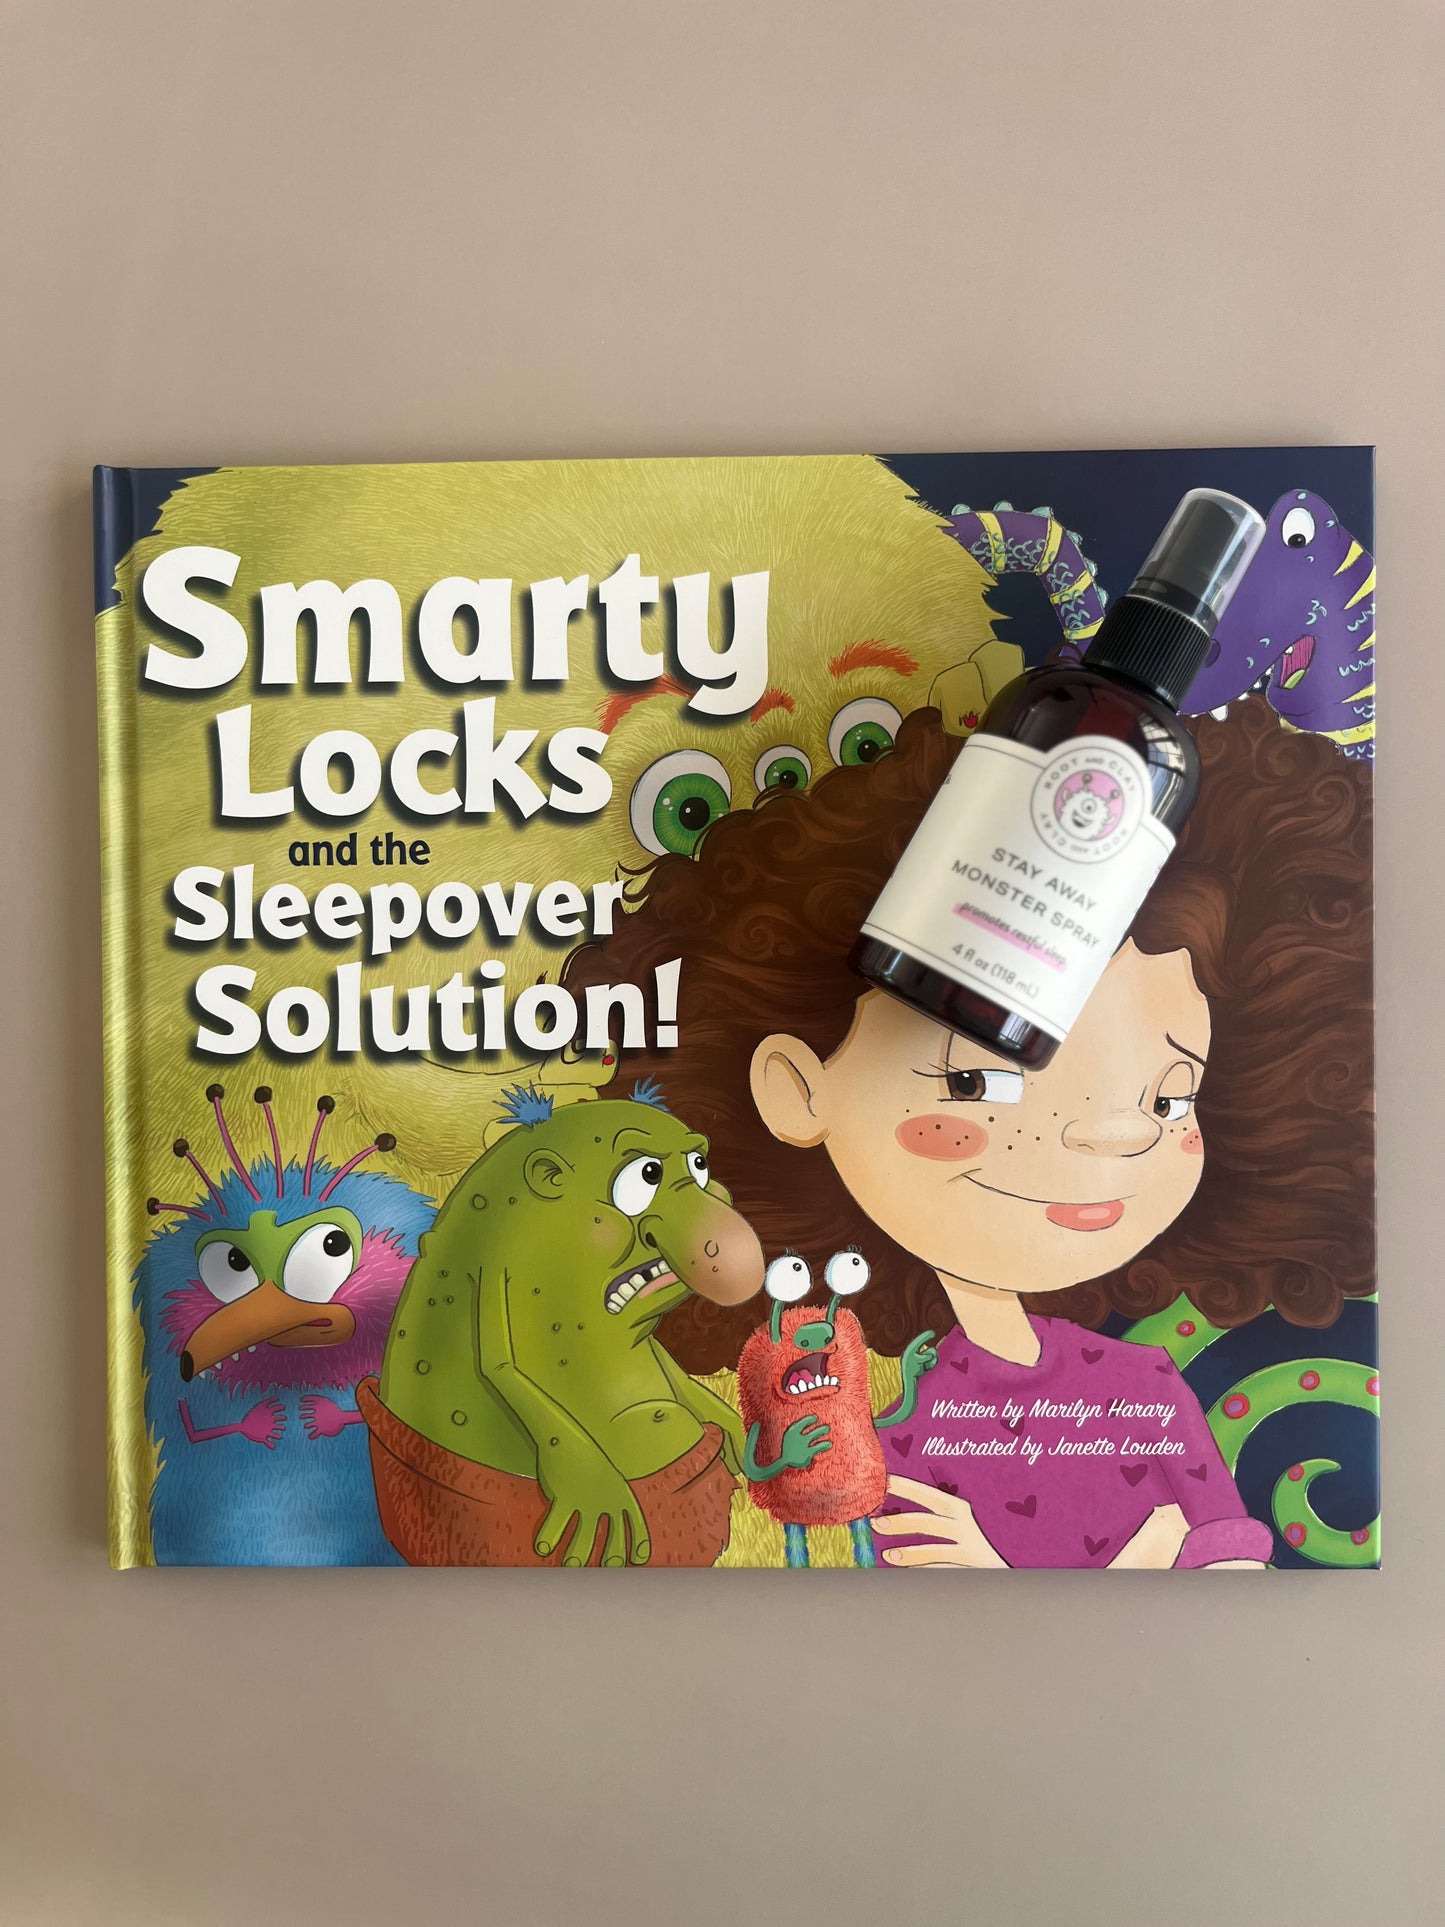 Smarty Locks and the Sleepover Solution + Monster Spray